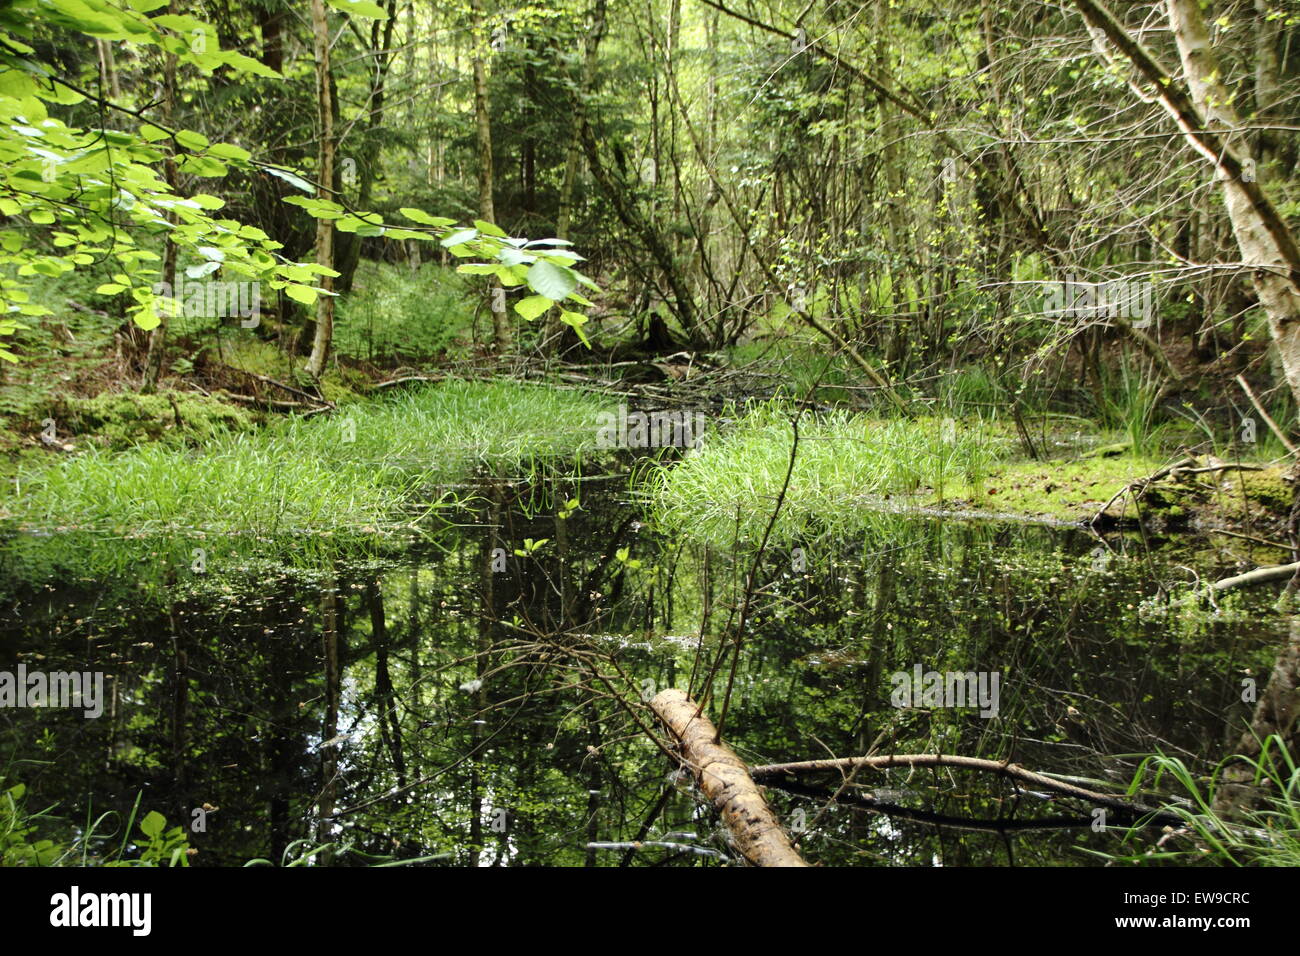 Reflection in Fresh Lake Forest Pond in Untouched Landscape with Shadows Stock Photo